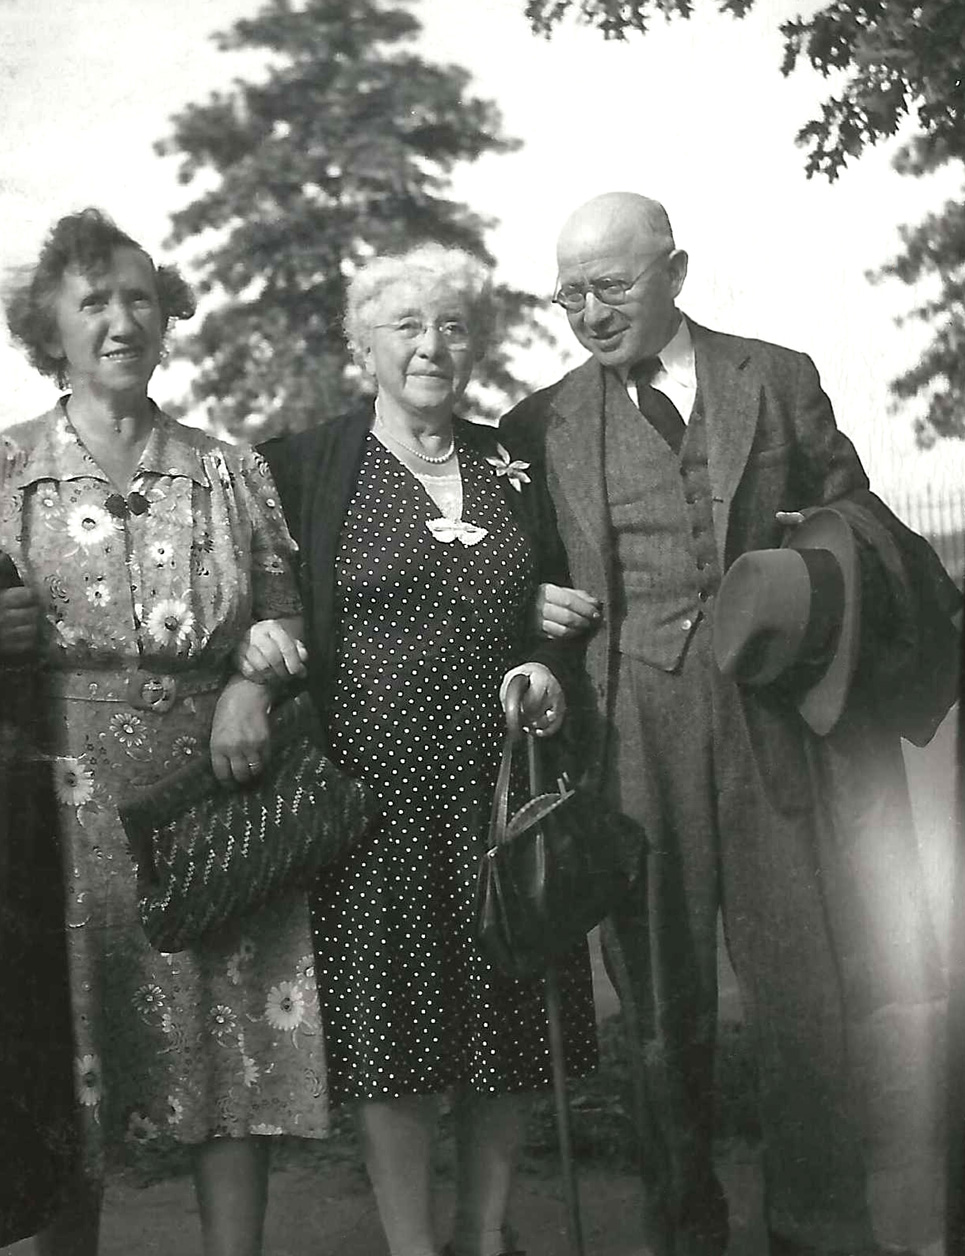 Clara survived Theresienstadt and was located by the husband of one of Max’s daughters who went to Europe after the war to find her and bring her to the USA. Here she stands between Jenny (my father’s mother) and her brother Max (who was last seen in a sailor suit posed with a hoop). The exact year of this picture is unknown. I only know that Jenny died in 1959.

Clara came to the USA with her most prized possession: a turn of the century motoring blanket made of horse hair (or some equally scratchy animal fiber) and full of holes. Lap-sized, with an animal spot design, it was truly a wretched object.  But to have any personal possession in a concentration camp was precious. My family still has her blanket. View full size.
